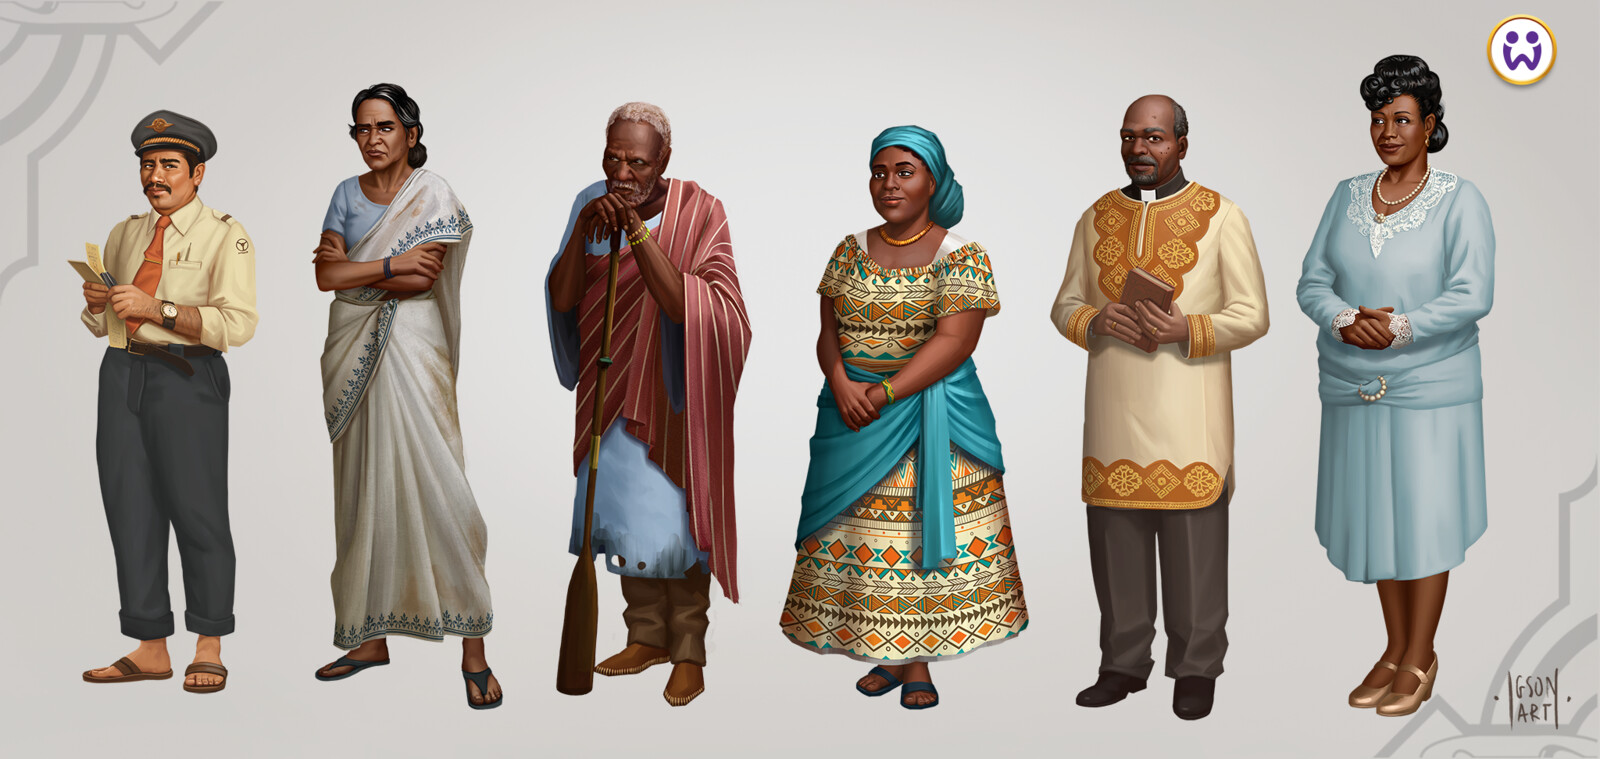 some of the first characters